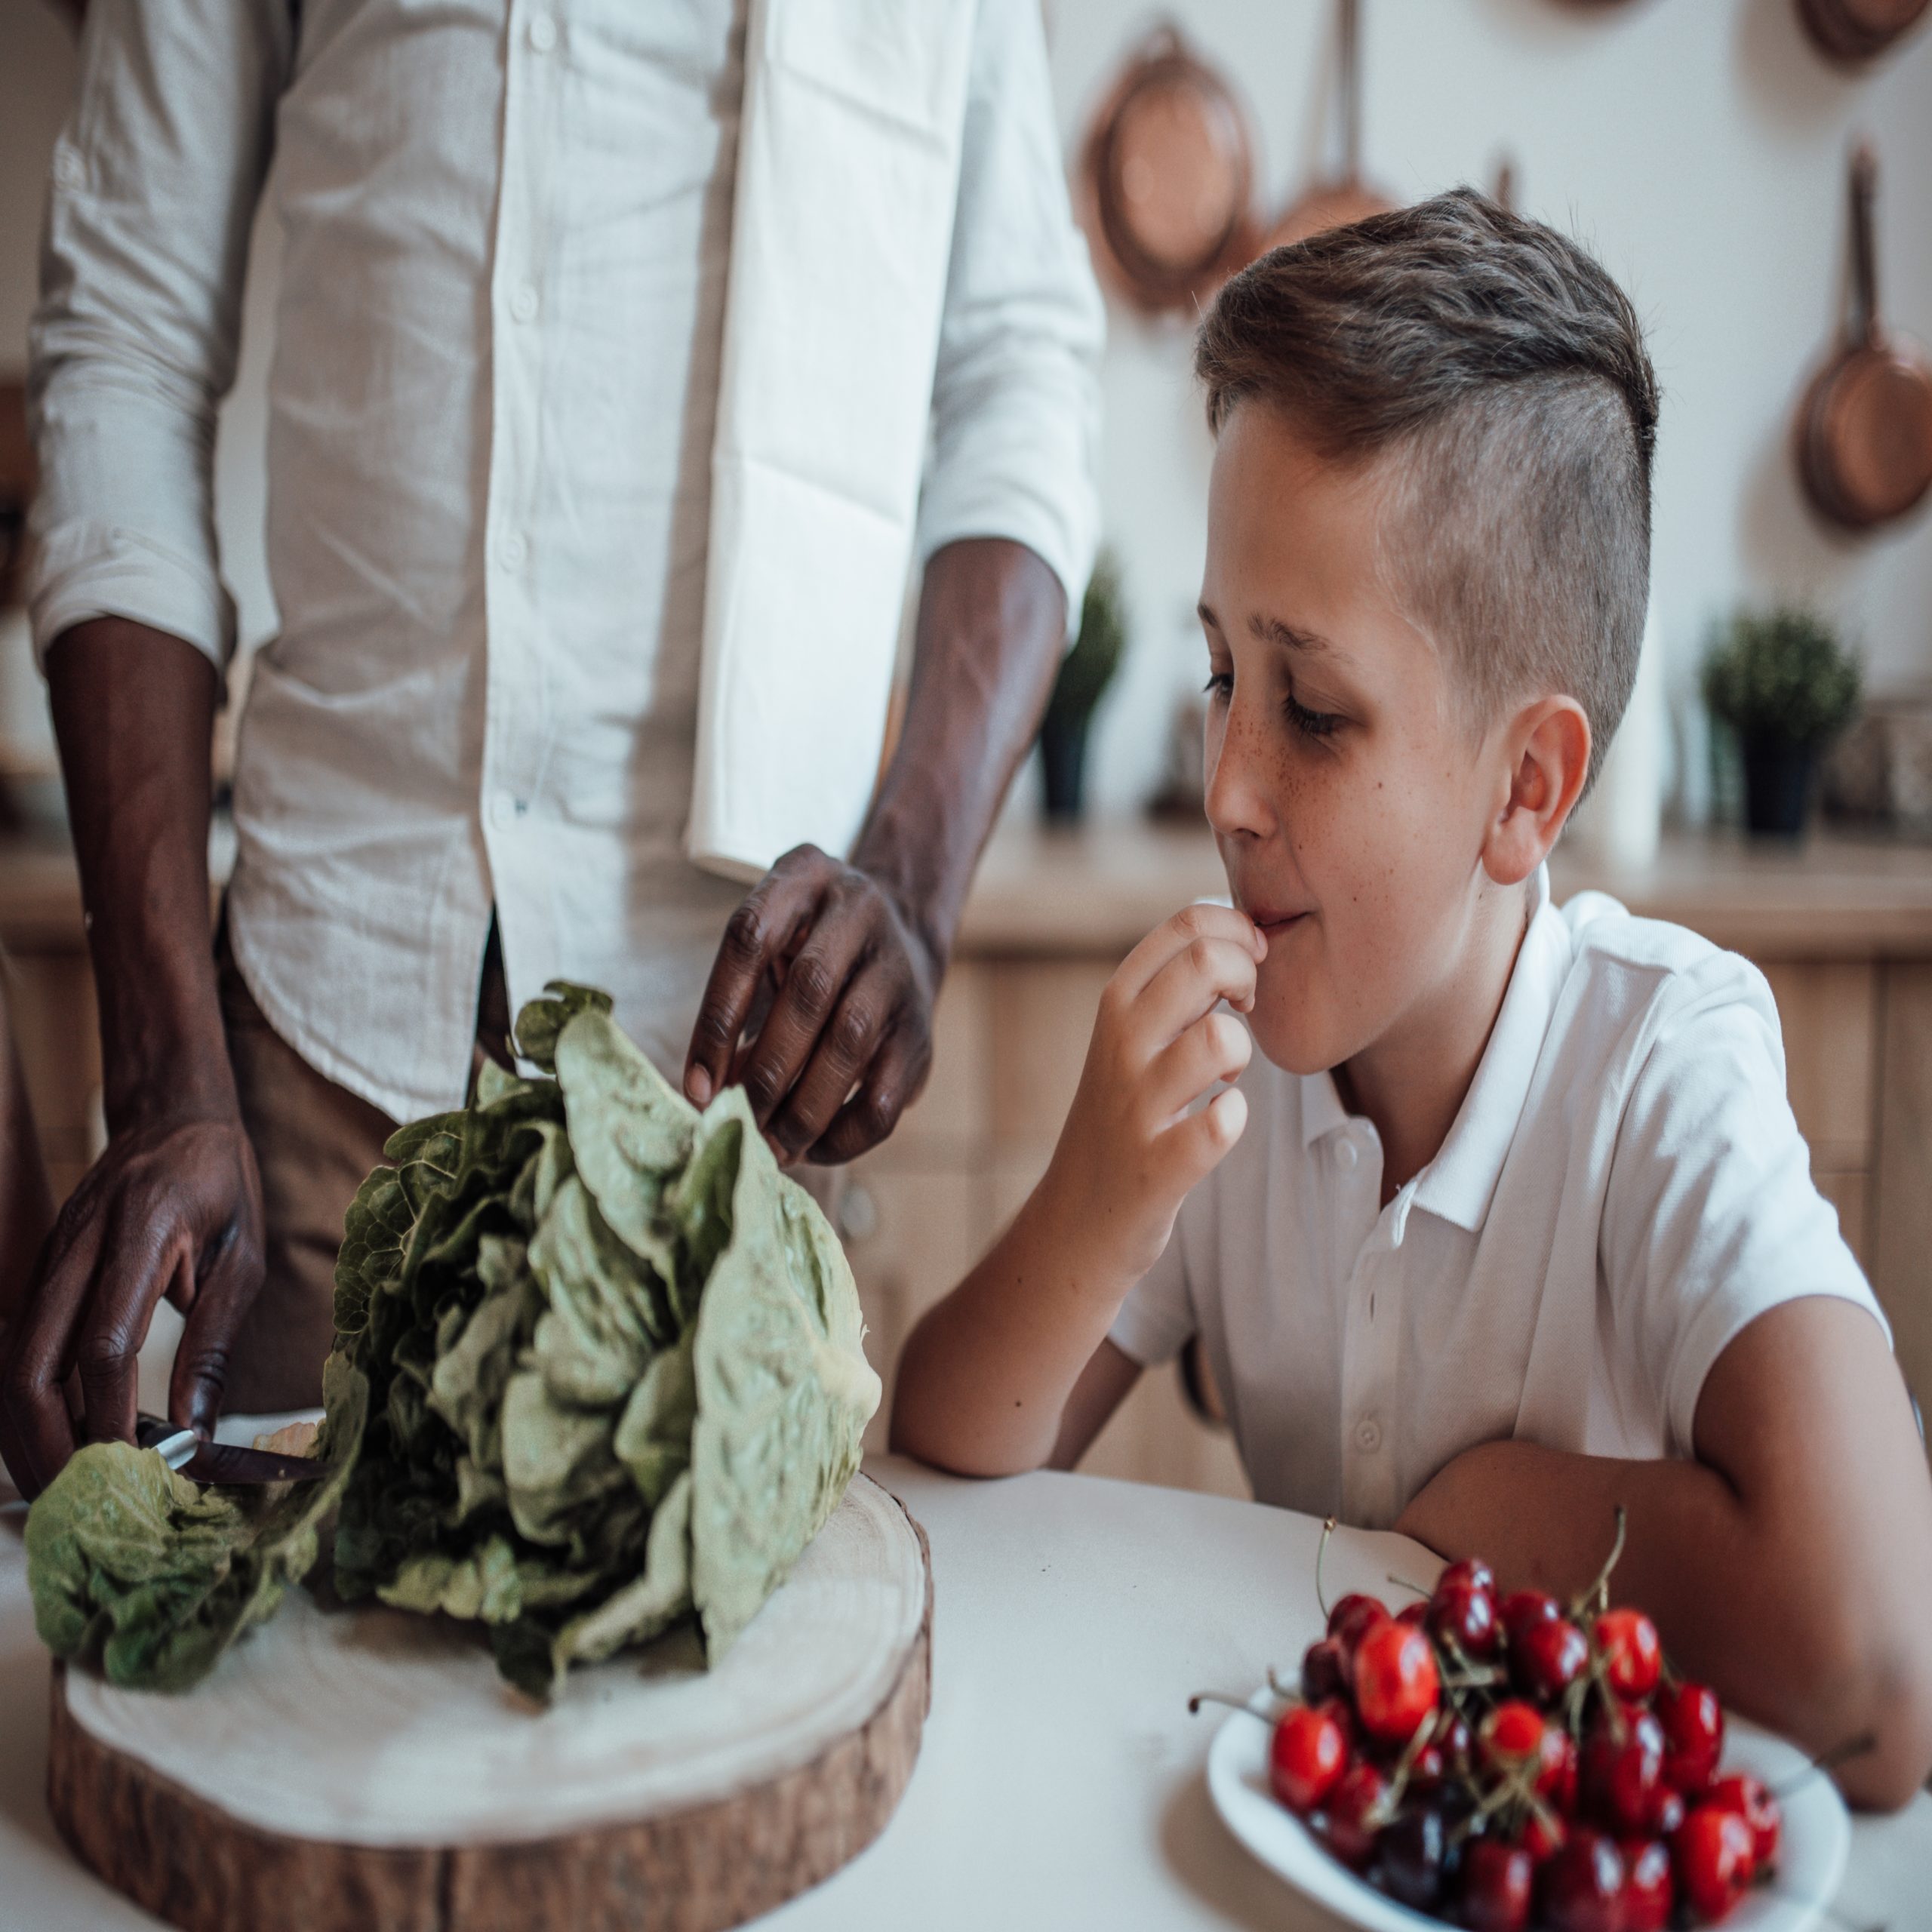 Kids' mental health tied to fruit and veggie intake, young boy at table with family tasting lettuce and cherries